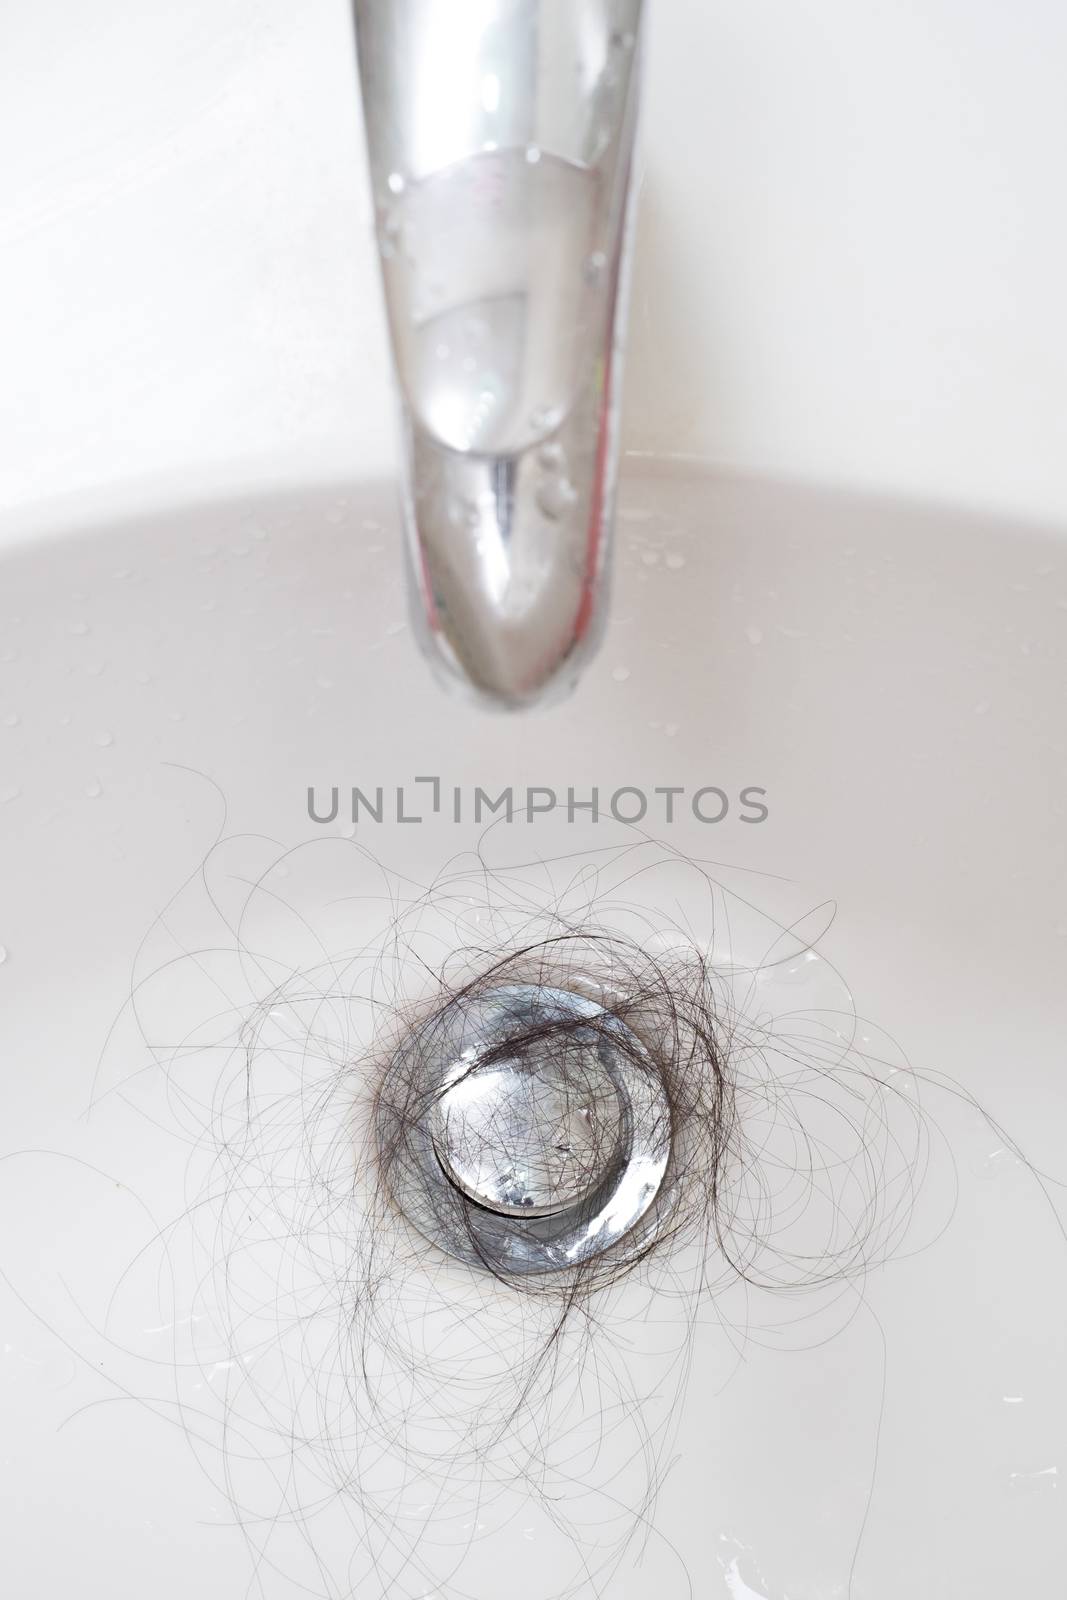 Hair loss problem in white sink.